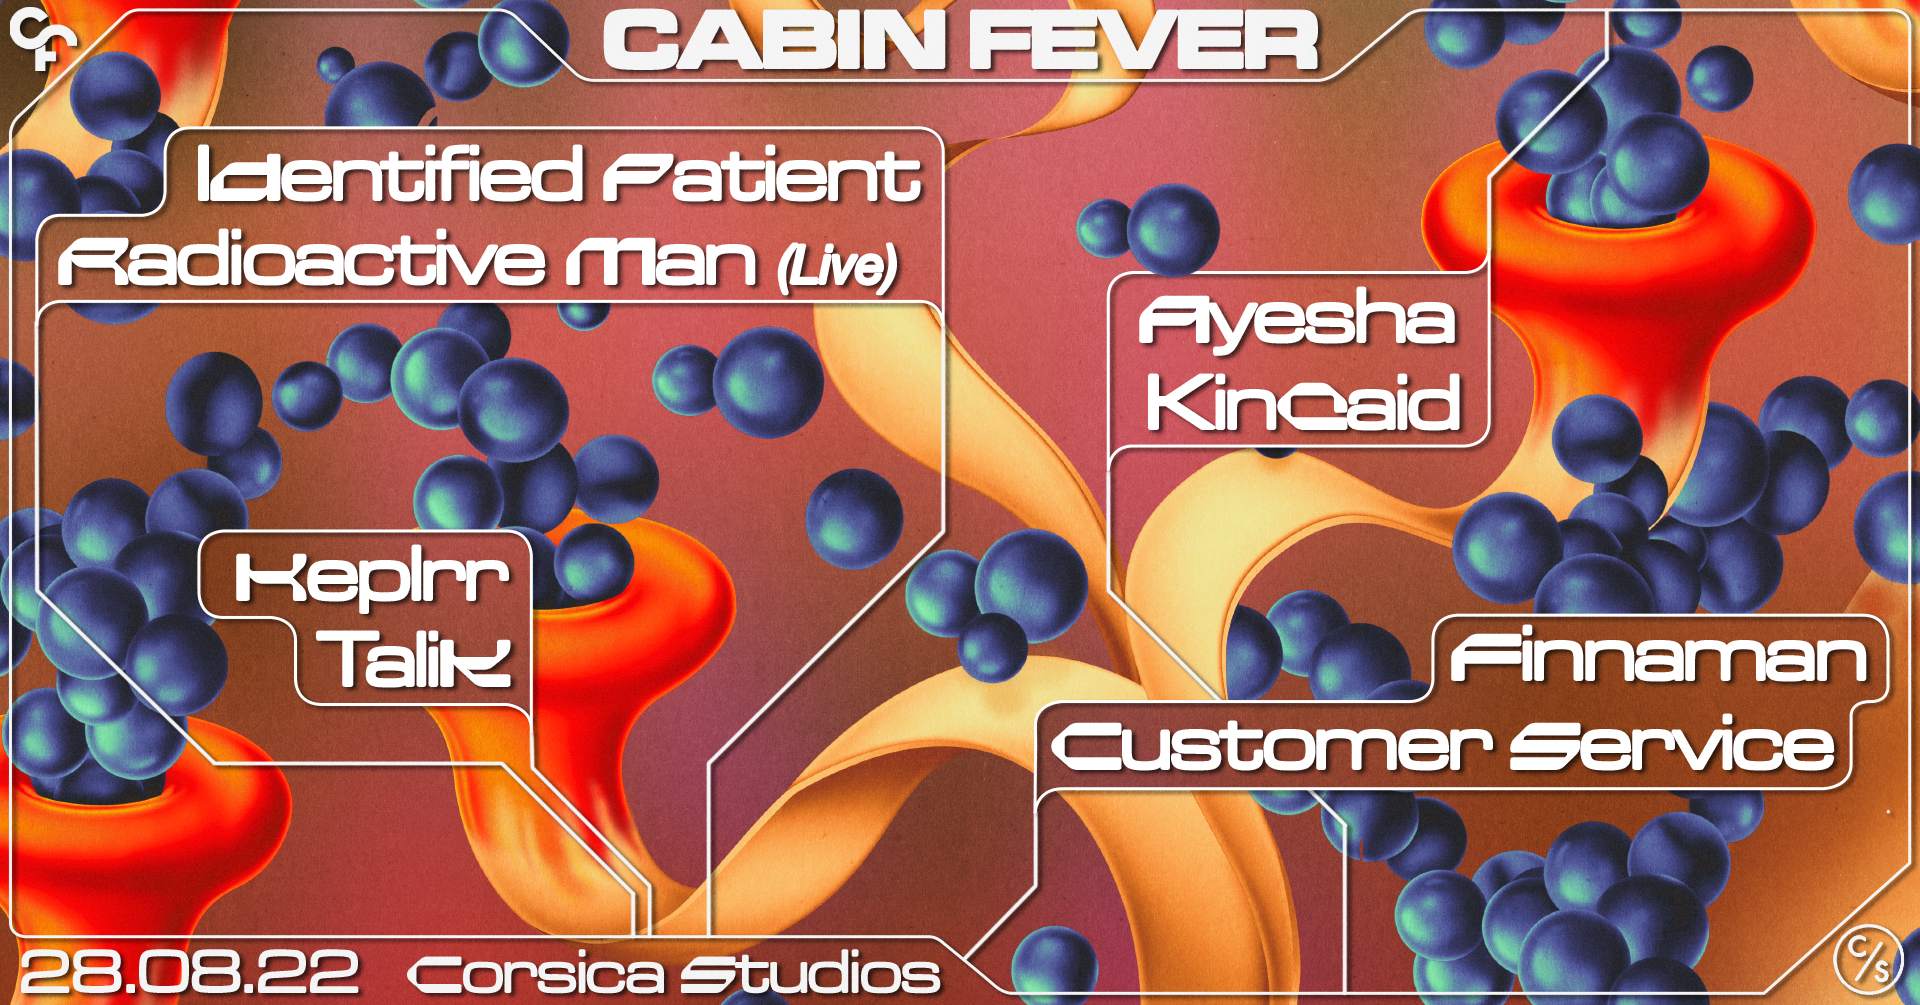 Cabin Fever 4th Birthday: Identified Patient, Radioactive Man (live), Ayesha and More - Página frontal